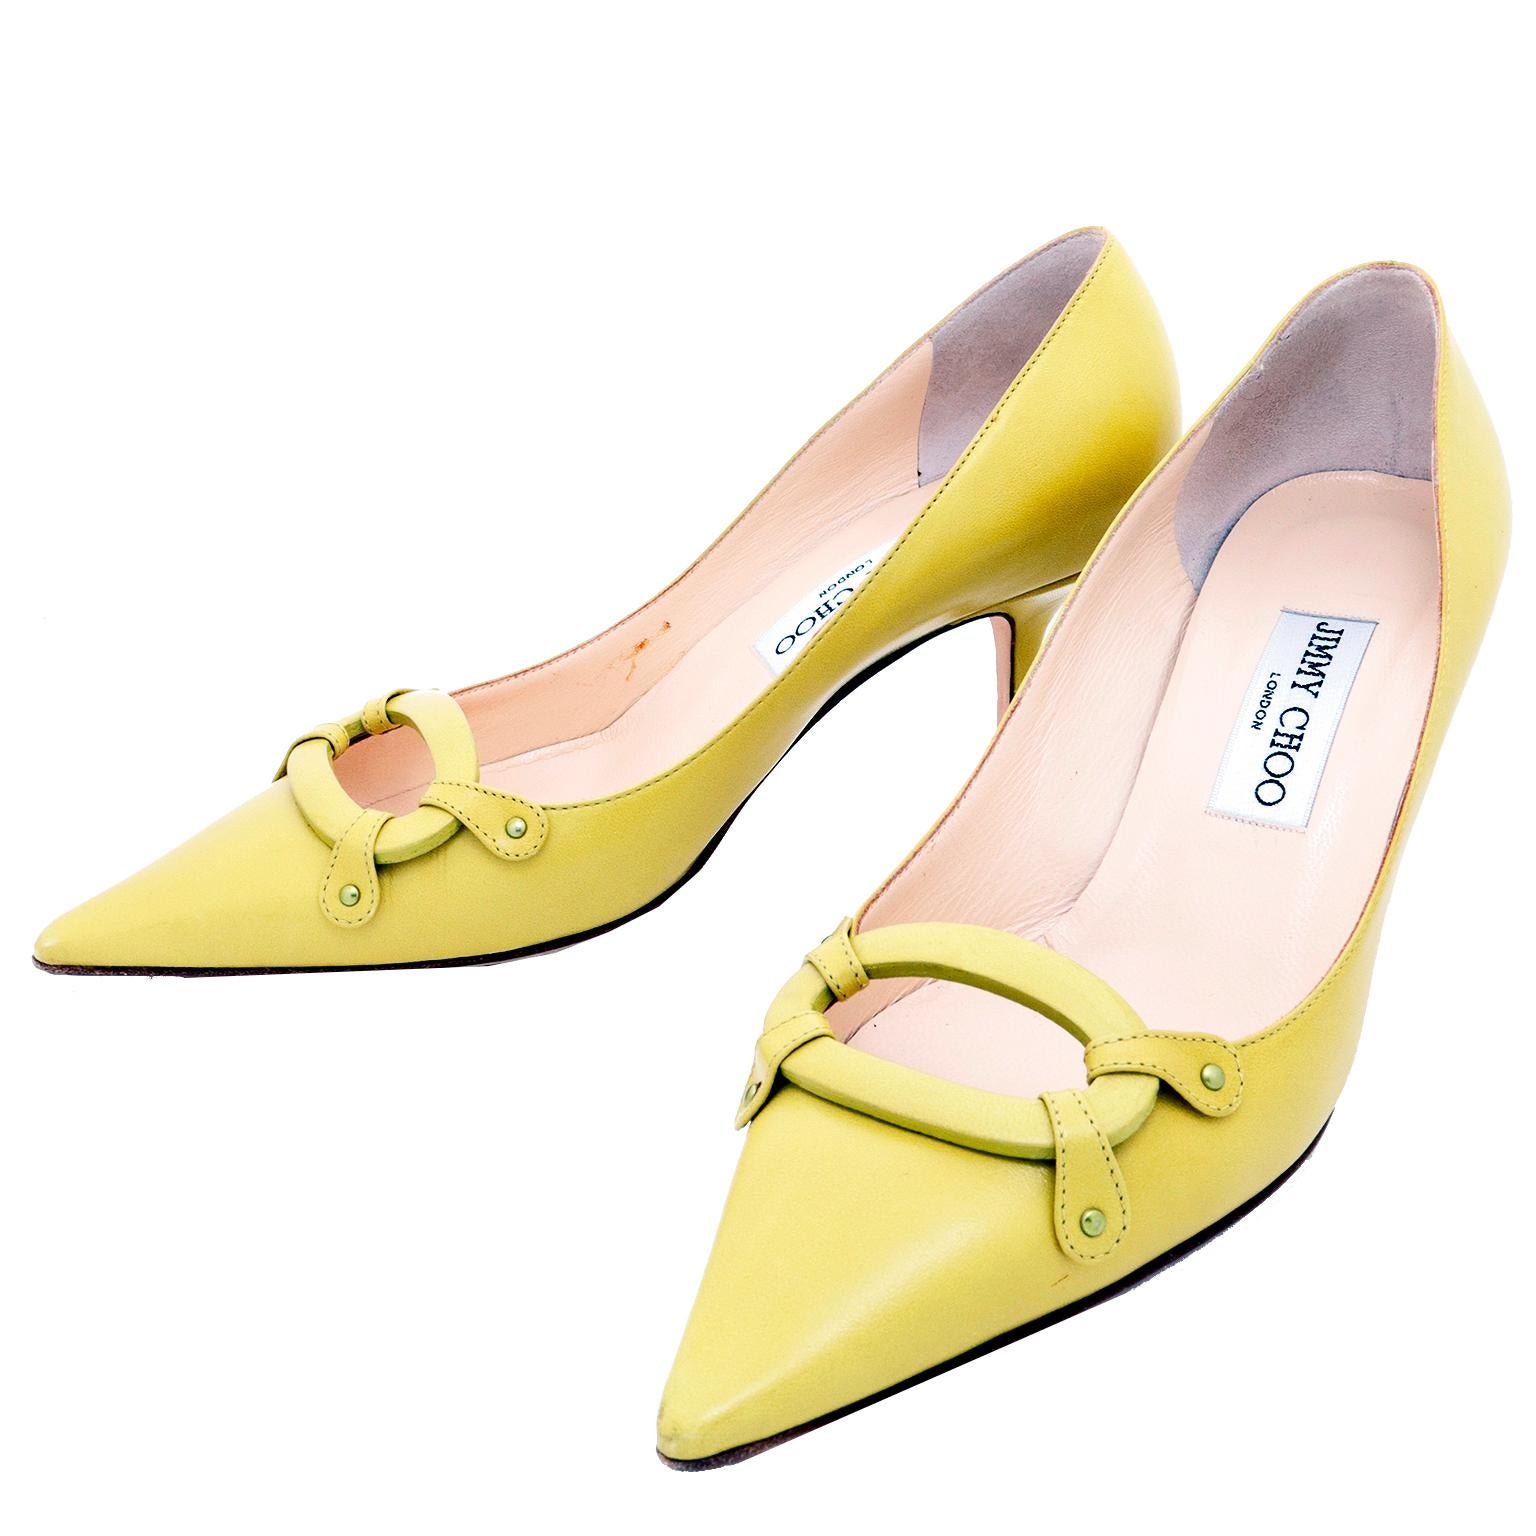 Jimmy Choo Vintage Chartreuse Green Pointed Toe Heels Size 37 In Good Condition For Sale In Portland, OR